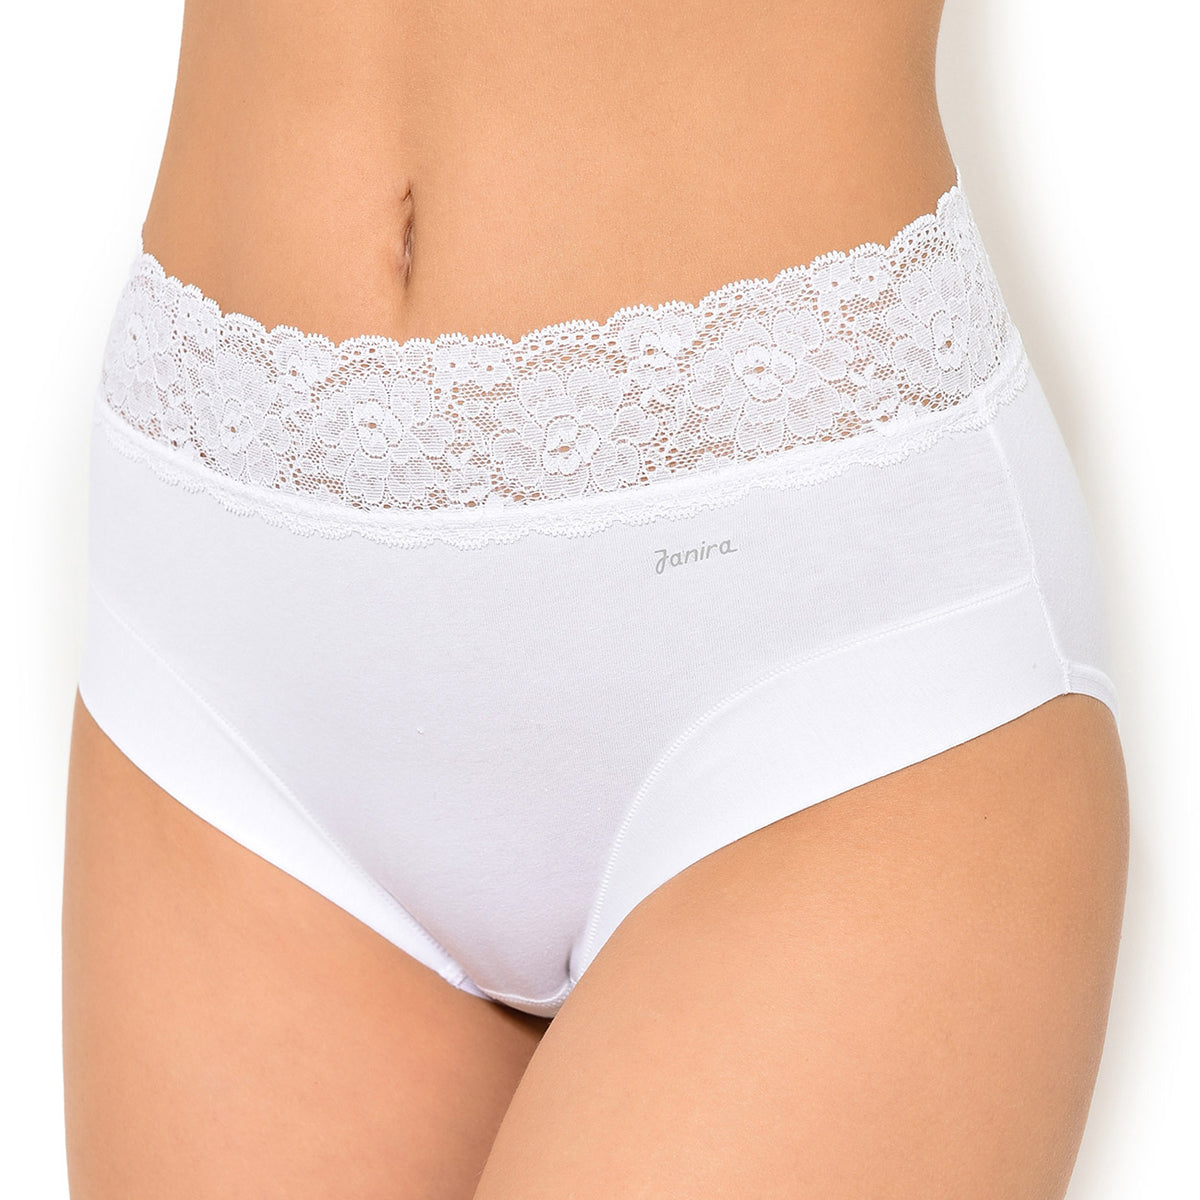 Women's Panties for sale in Cathan, Washington